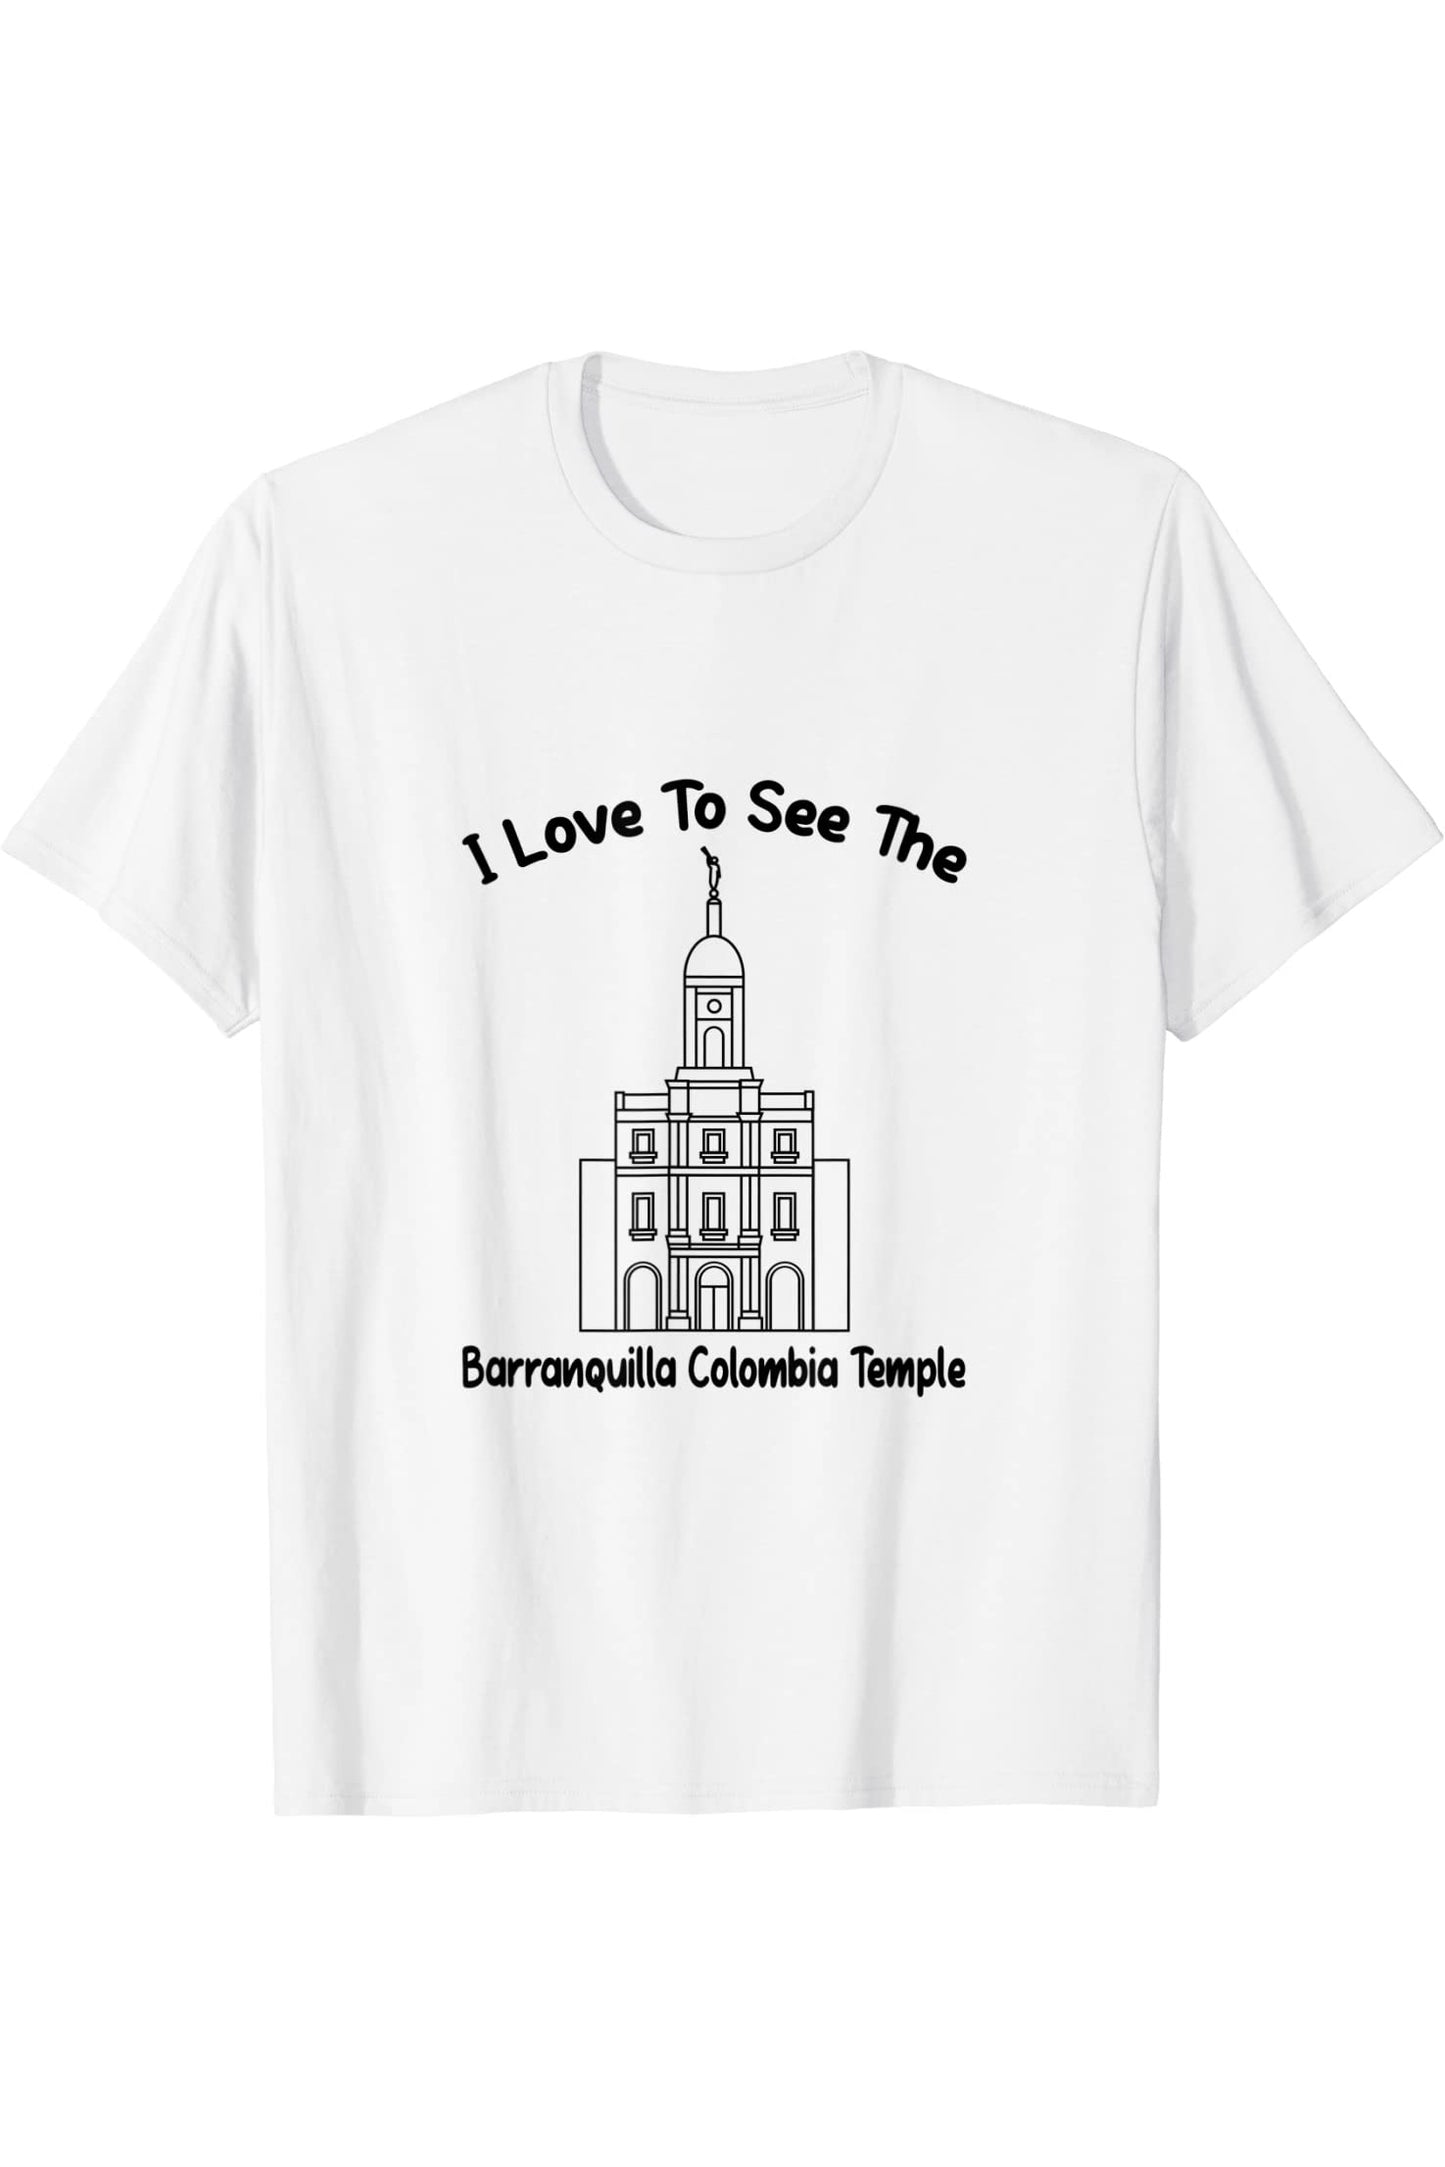 Barranquilla Colombia Temple T-Shirt - Primary Style (English) US